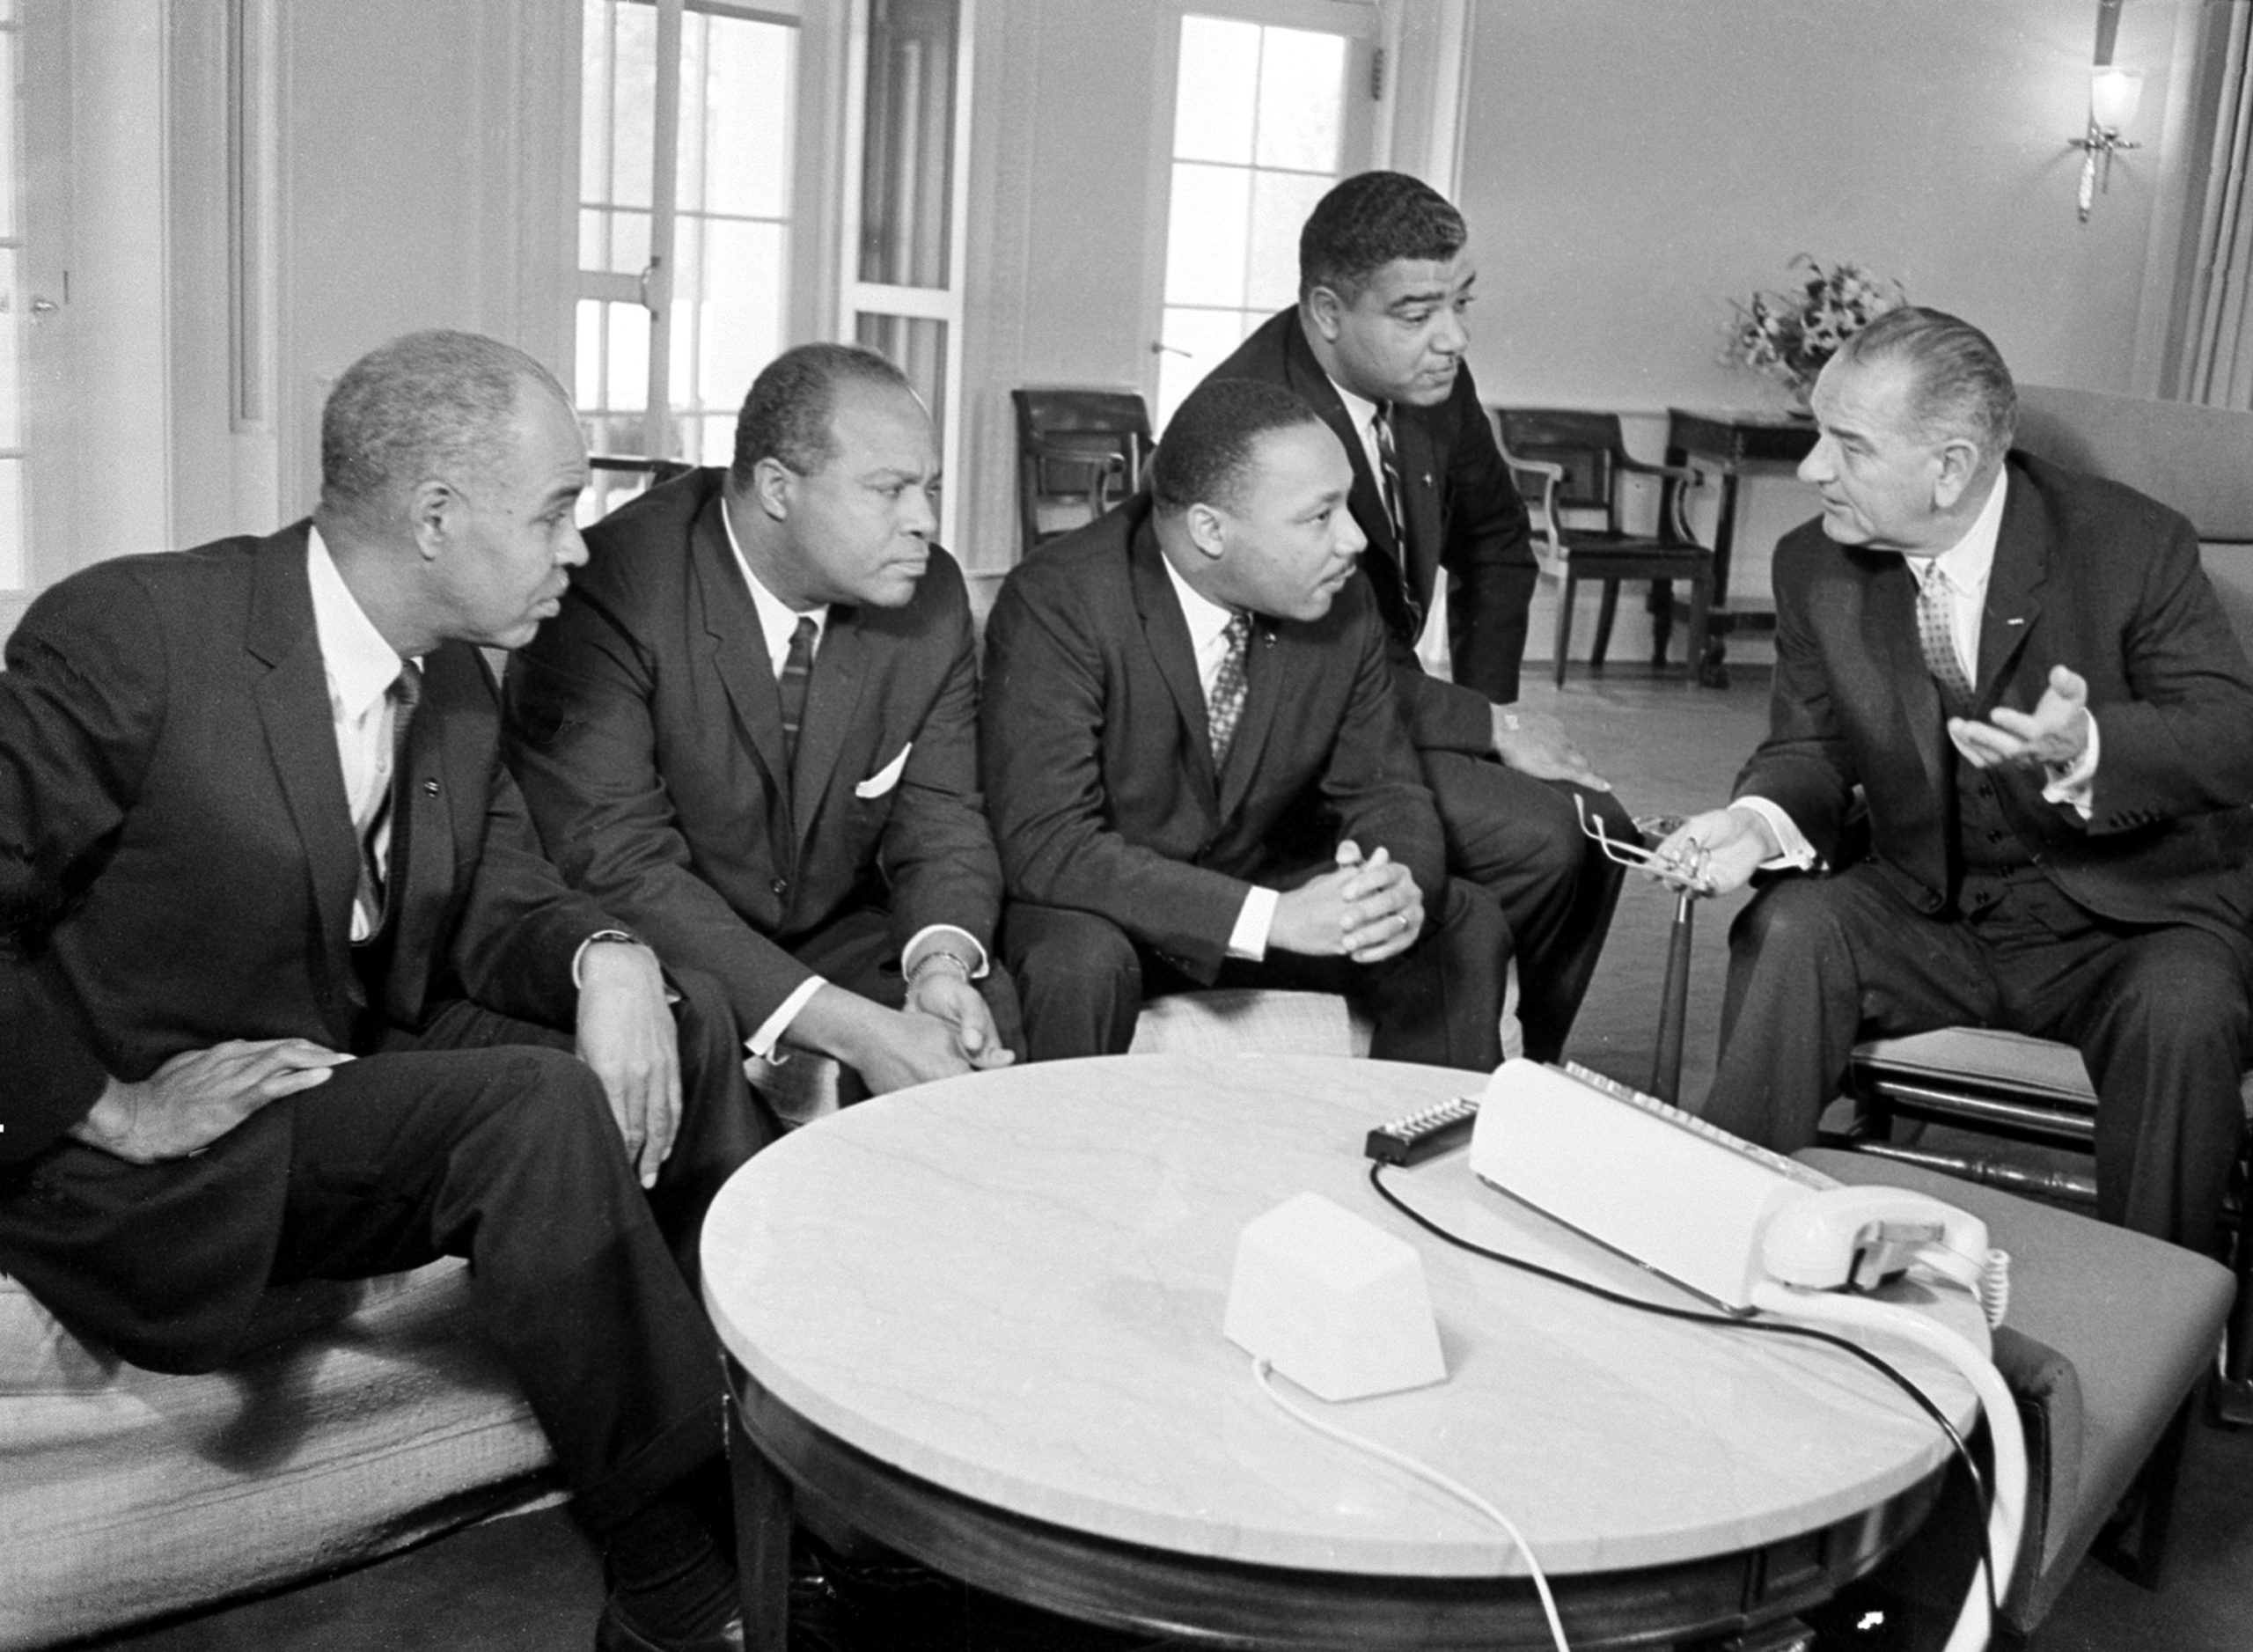 U.S. President Lyndon B. Johnson, right, talks with civil rights leaders in his White House office in Washington, D.C., Jan. 18, 1964. The black leaders, from left, are, Roy Wilkins, executive secretary of the National Association for the Advancement of Colored People (NAACP); James Farmer, national director of the Committee on Racial Equality; Dr. Martin Luther King Jr., head of the Southern Christian Leadership Conference; and Whitney Young, executive director of the Urban League. (AP Photo)